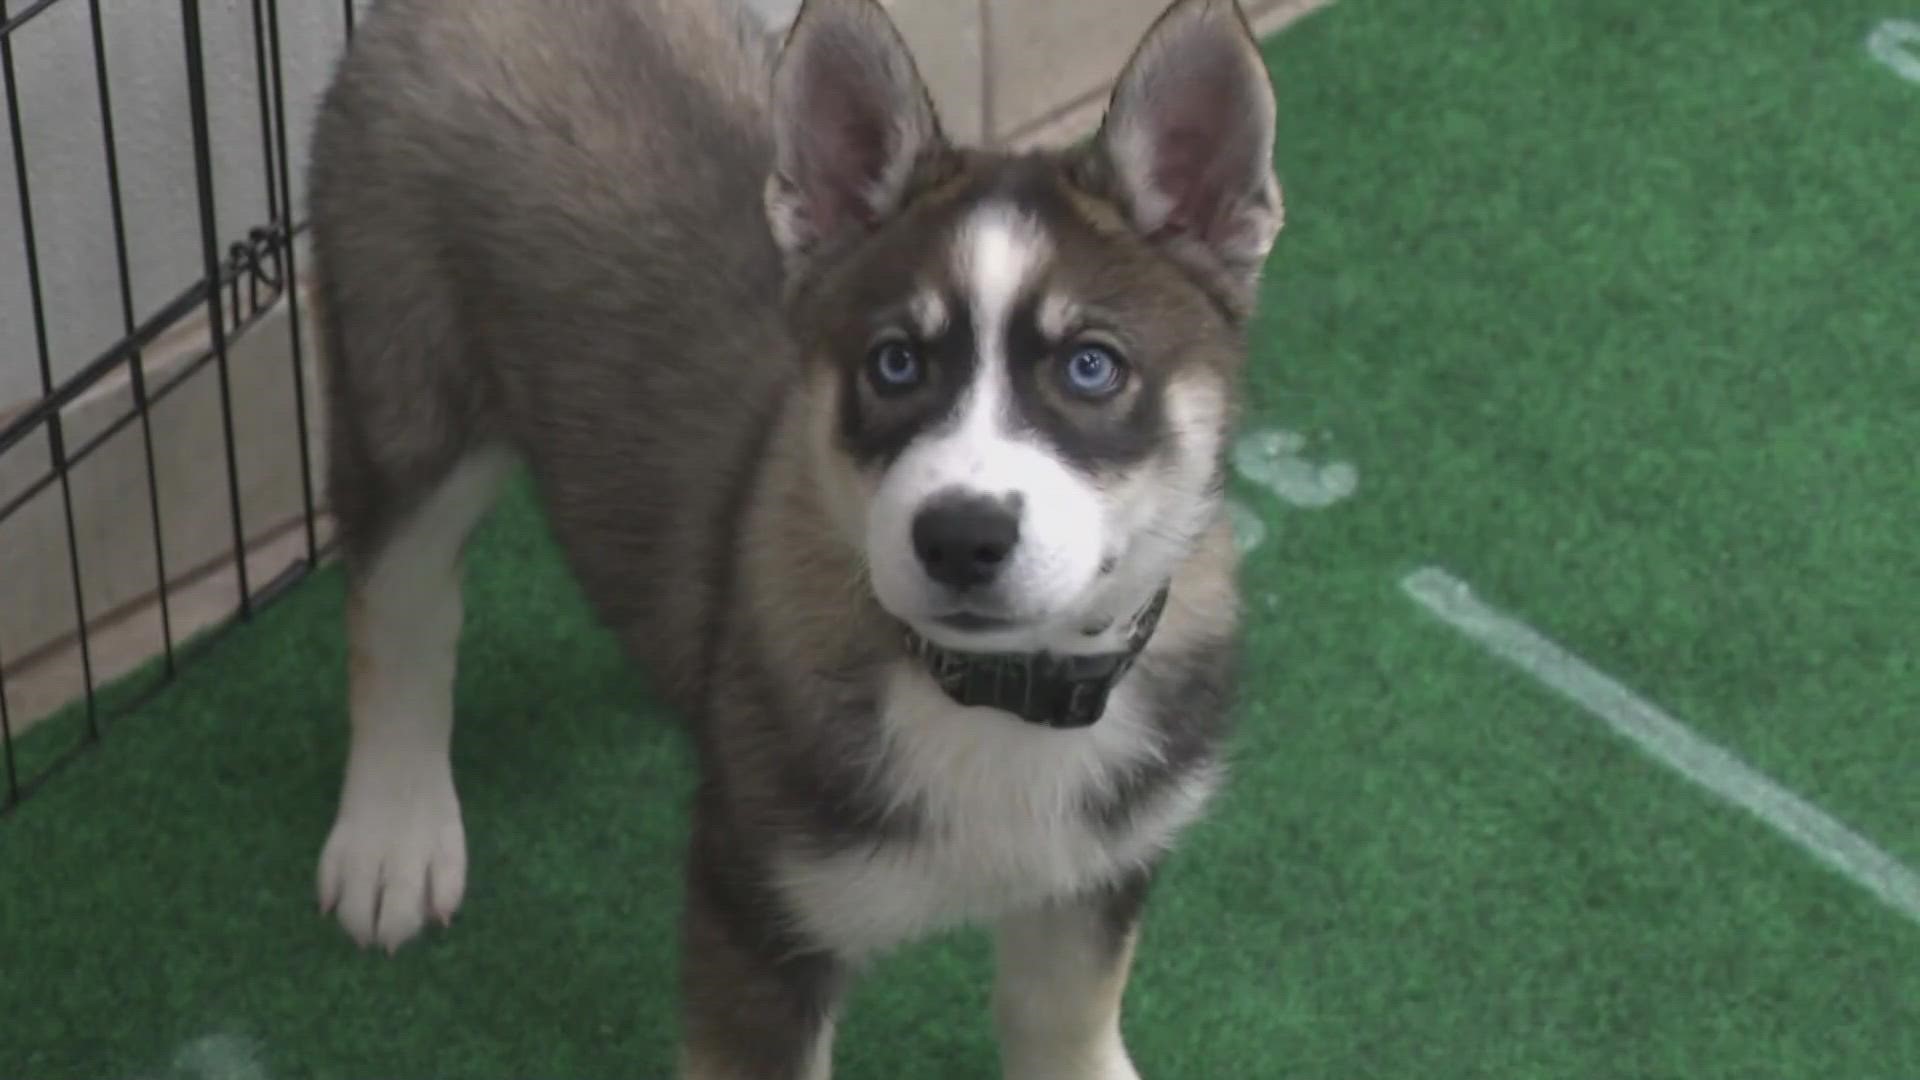 The Arizona Humane Society held a friendly Puppy Bowl practice game Friday to raise awareness for pet adoptions.